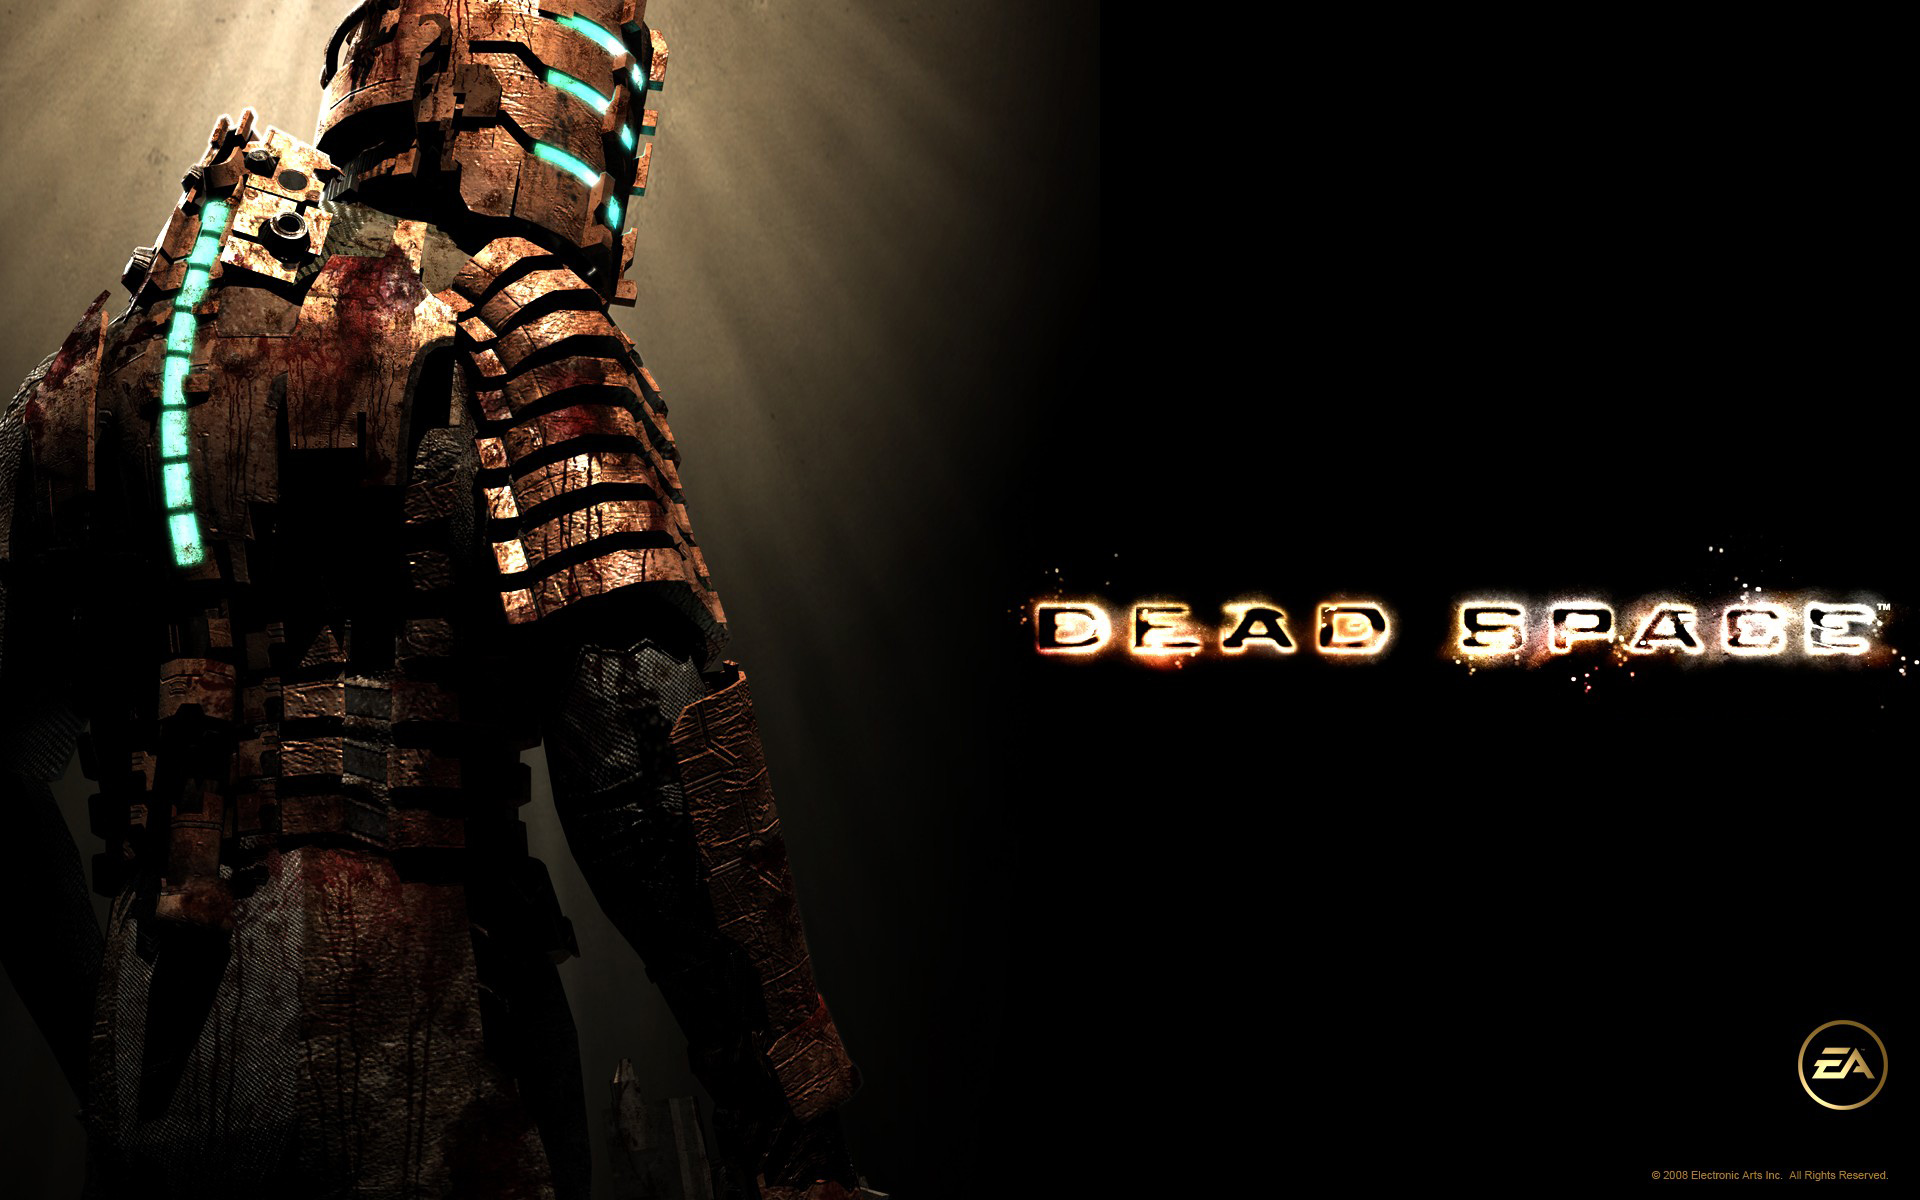 Dead Space Wallpaper Pack download   Mod DB